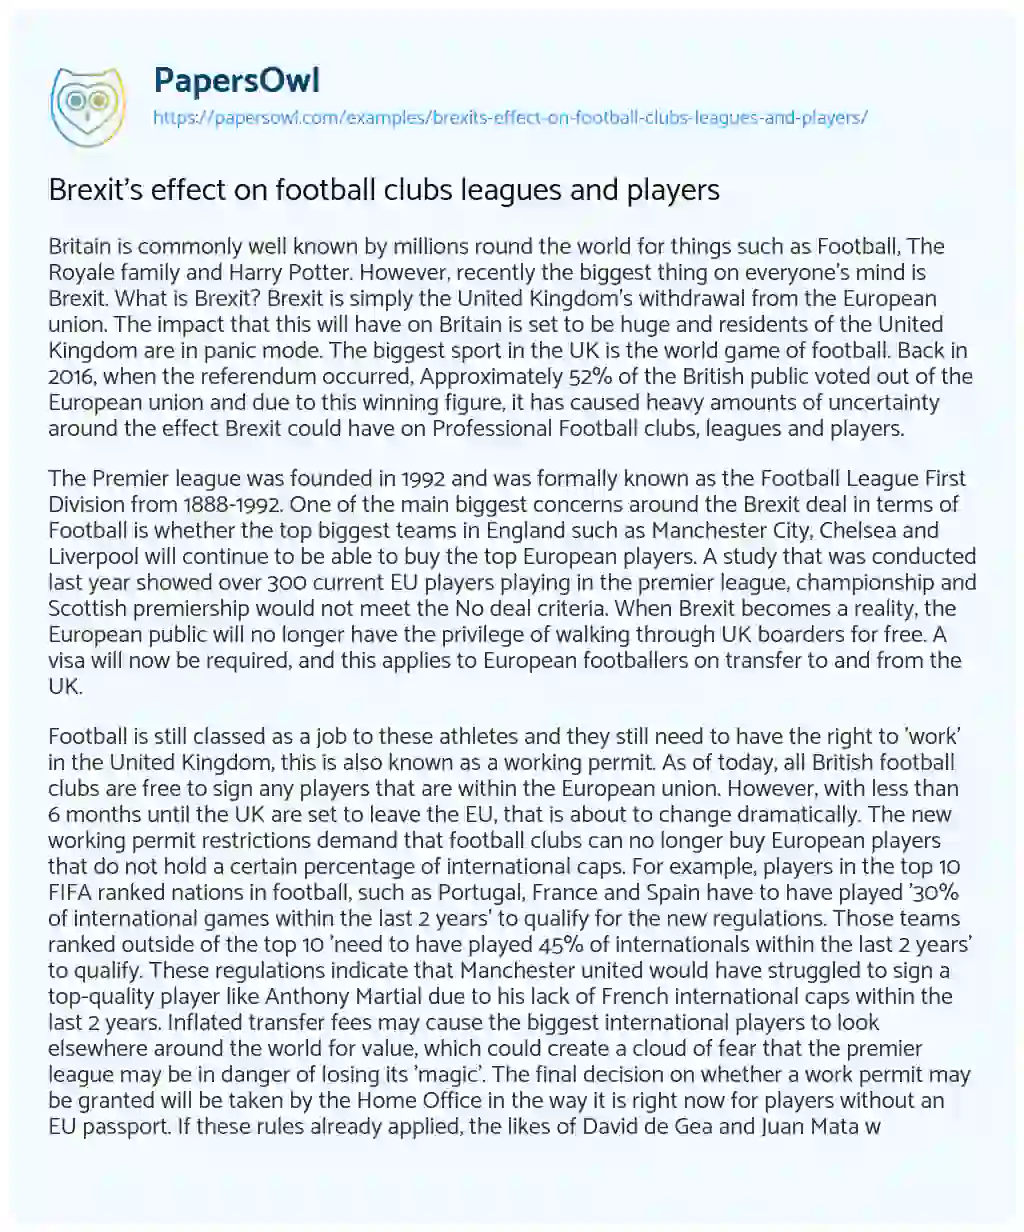 Essay on Brexit’s Effect on Football Clubs Leagues and Players